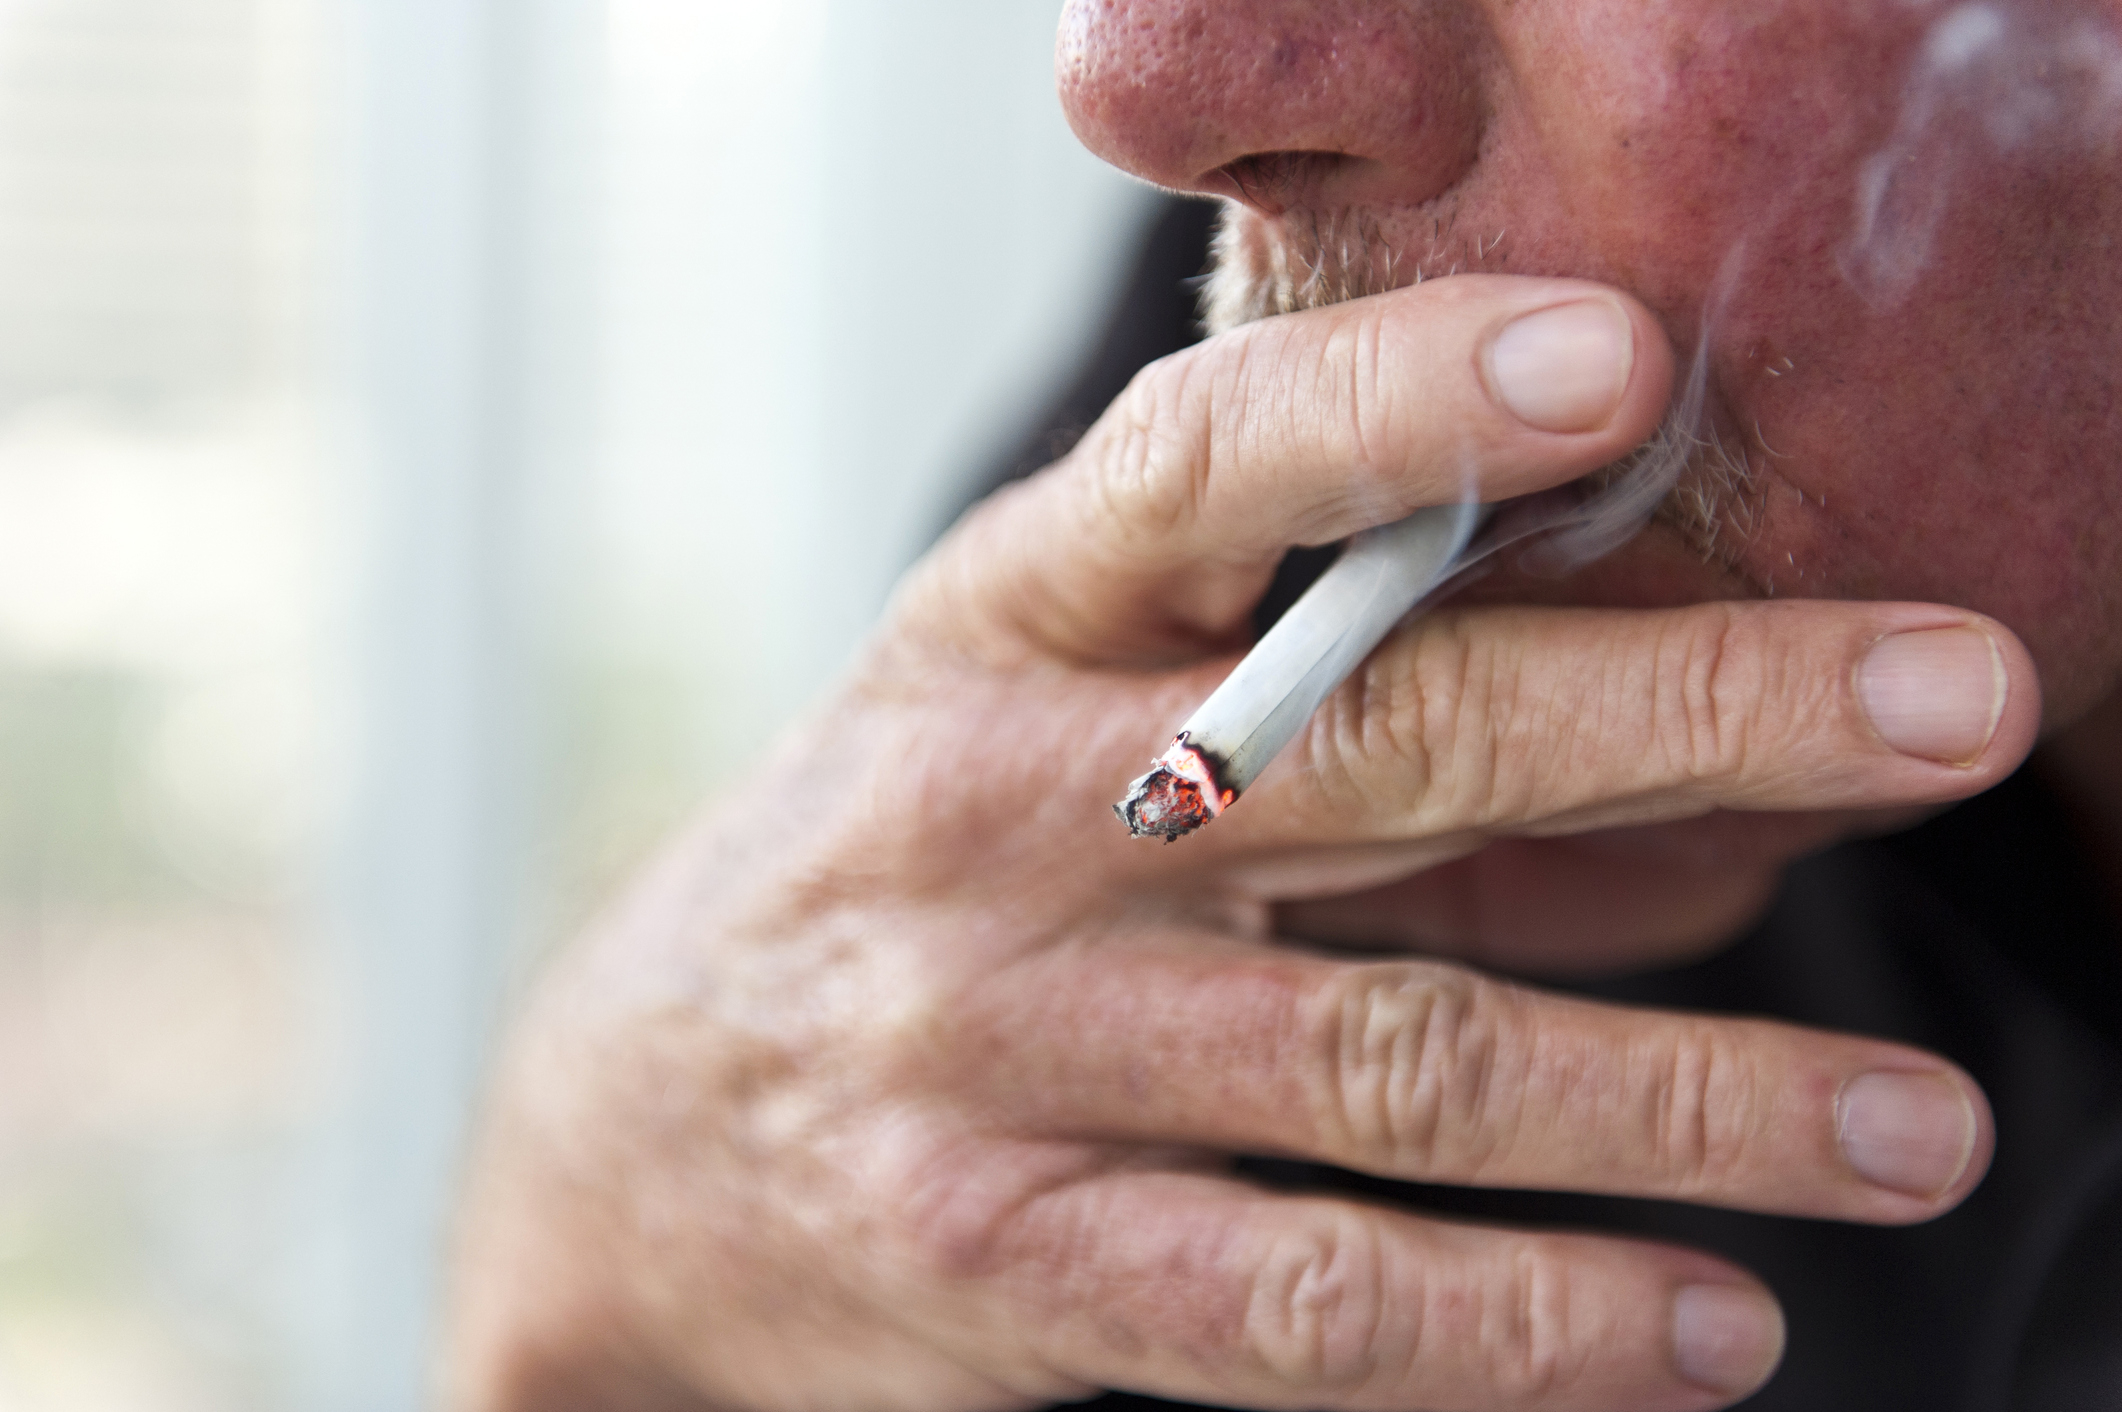 Person smoking a cigarette, close-up of hand and mouth, focus on lit end